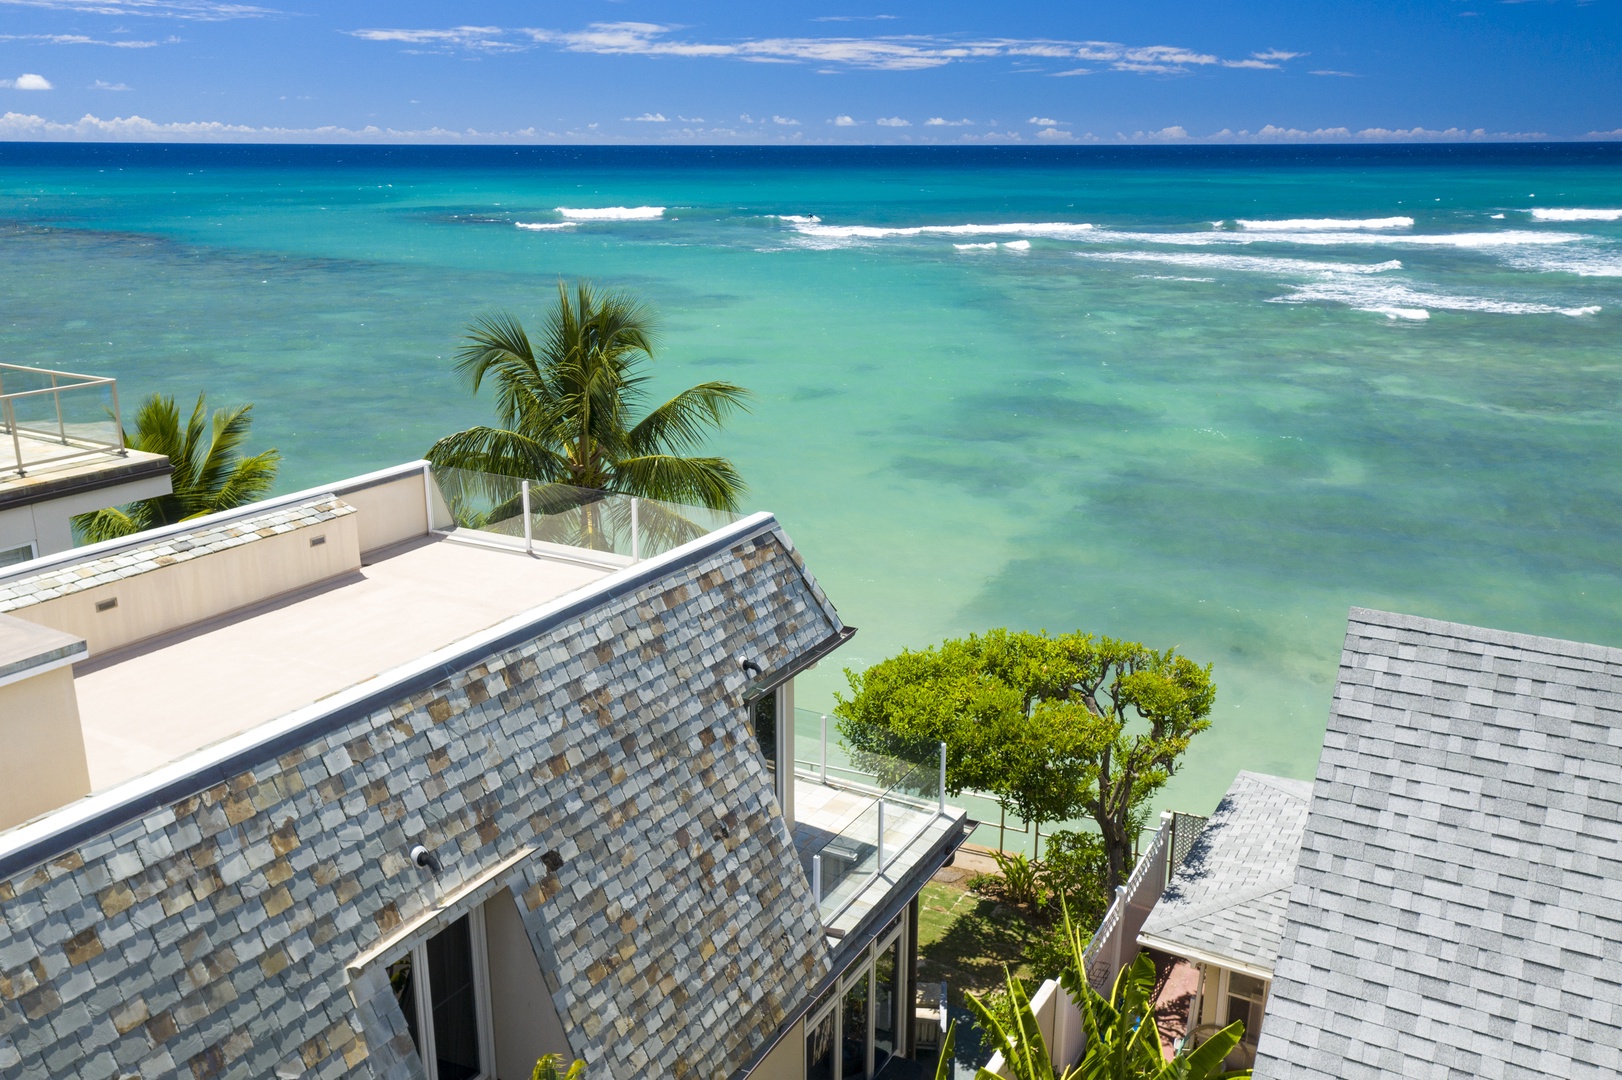 Honolulu Vacation Rentals, Diamond Head Surf House - Aerial View of the oceanfront home.